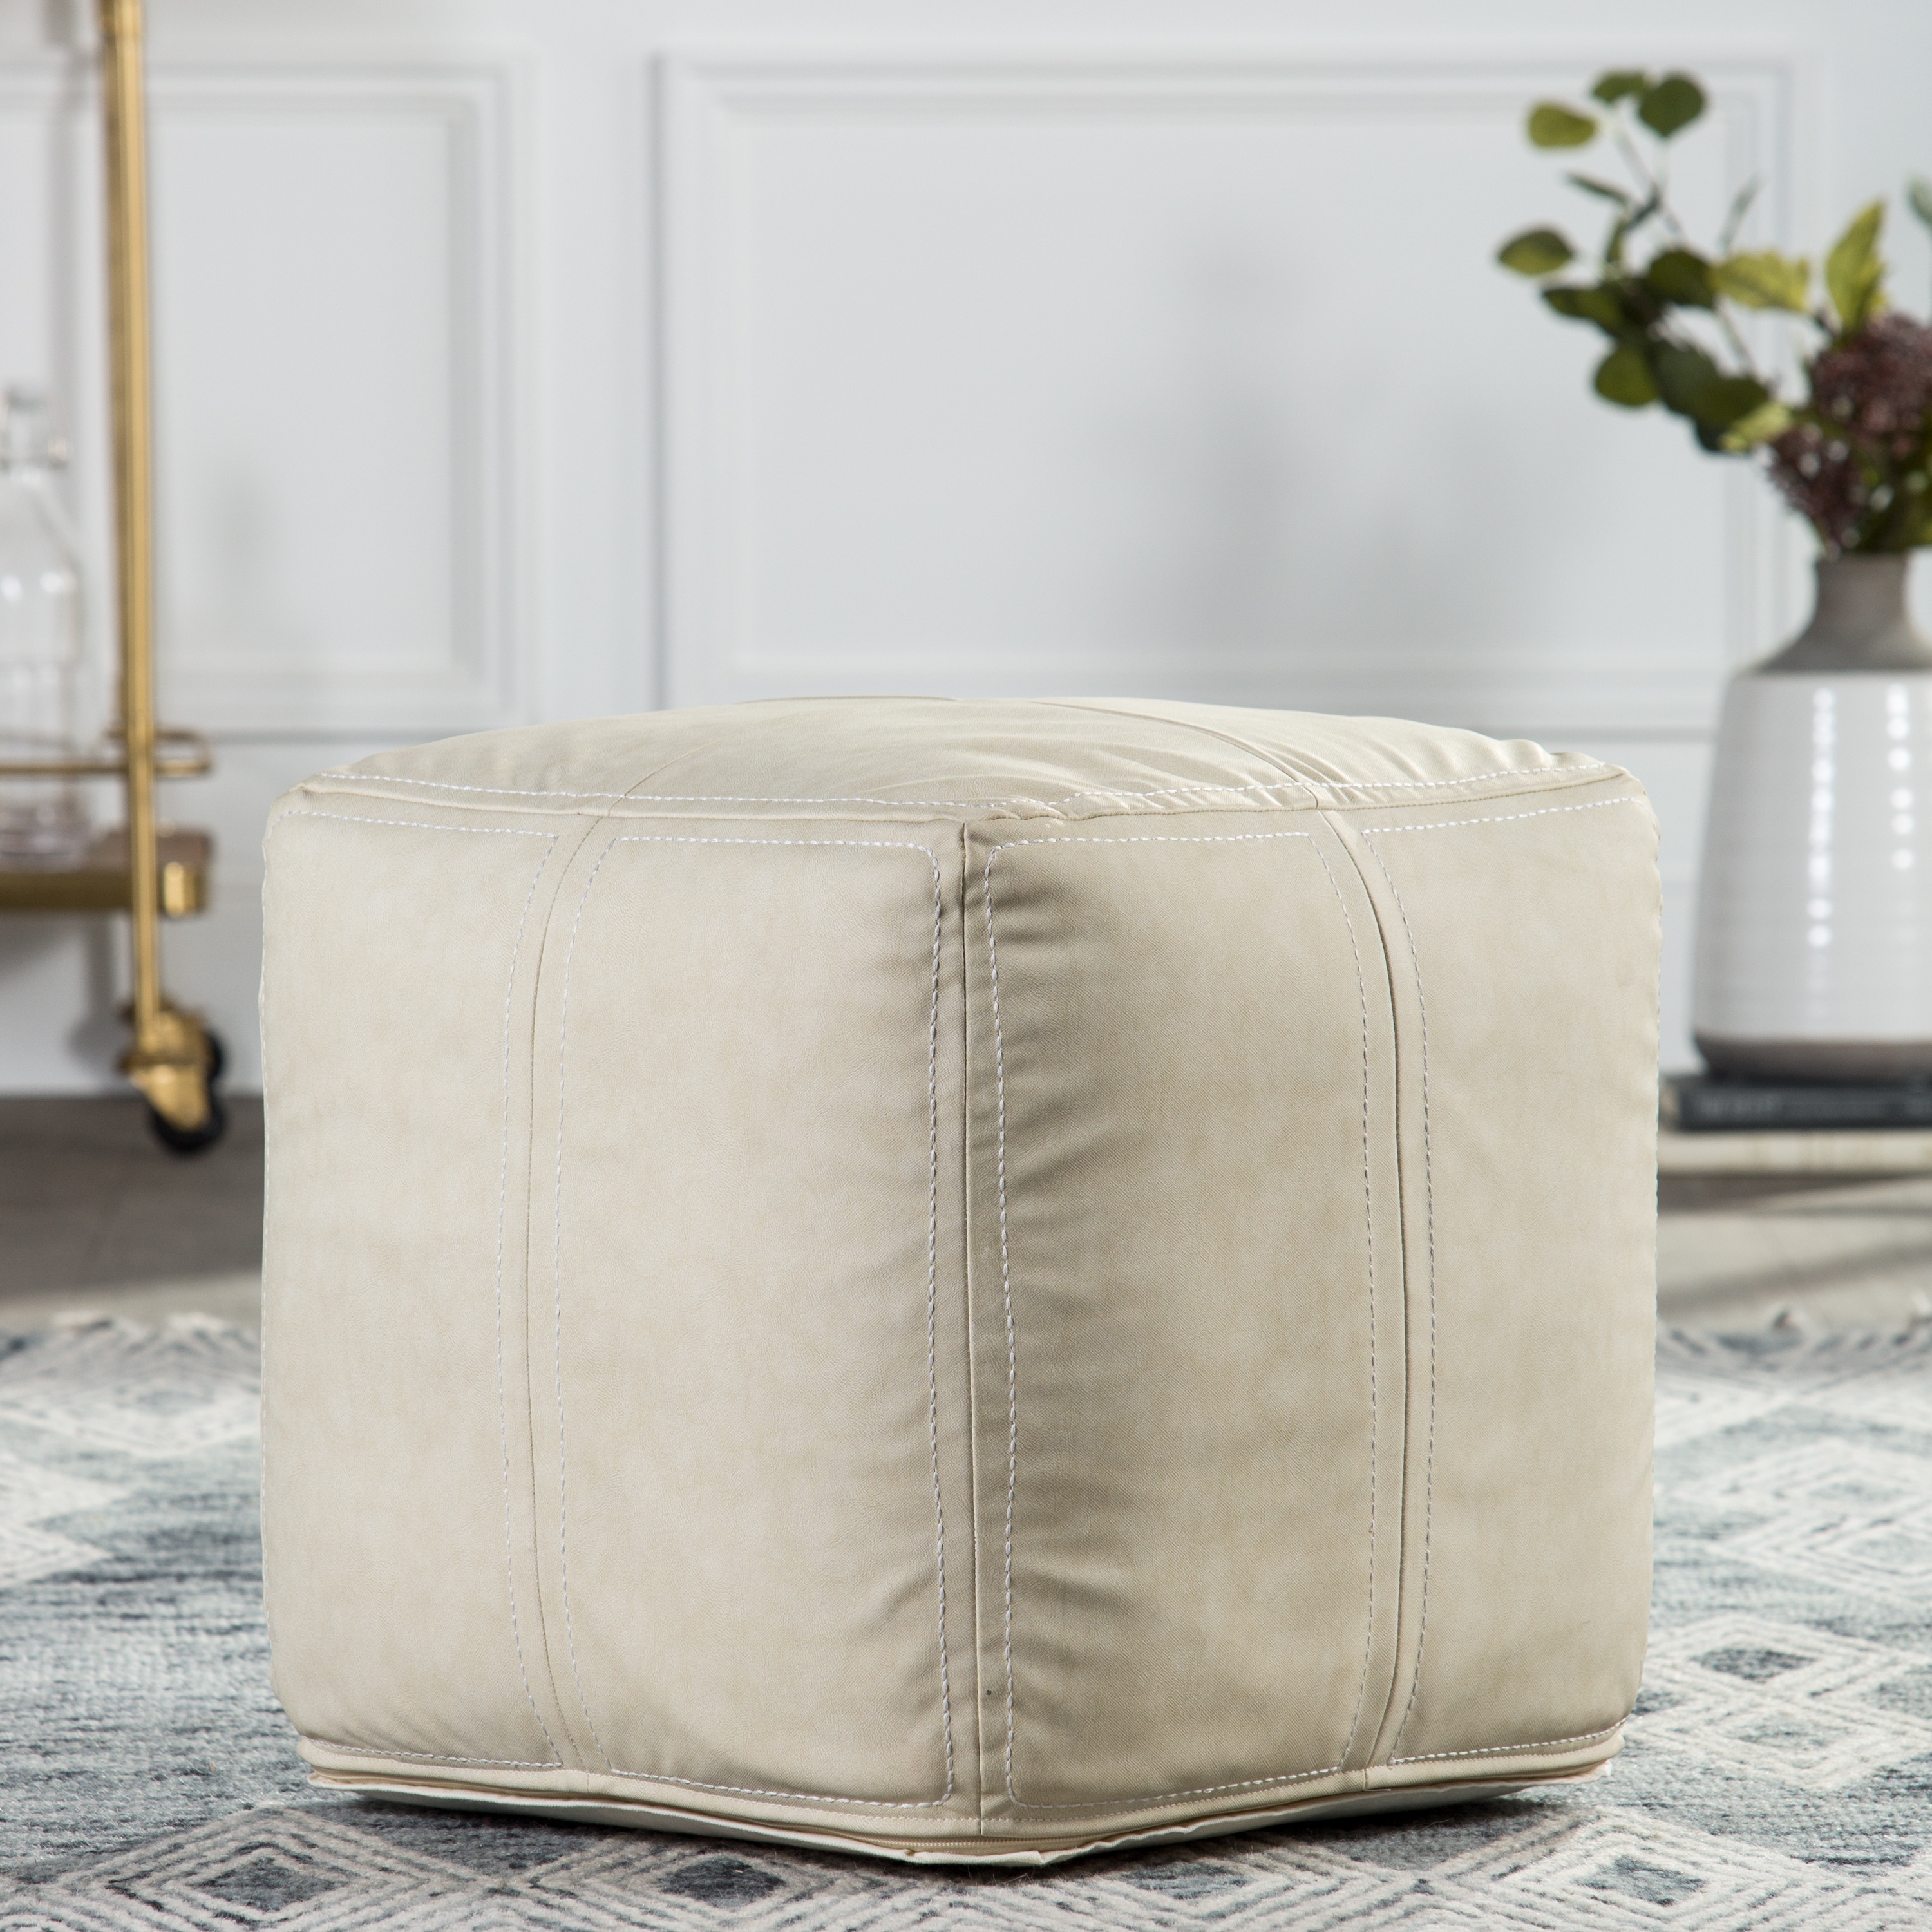 Nikki Chu by Suave Solid White Cube Pouf - Image 1